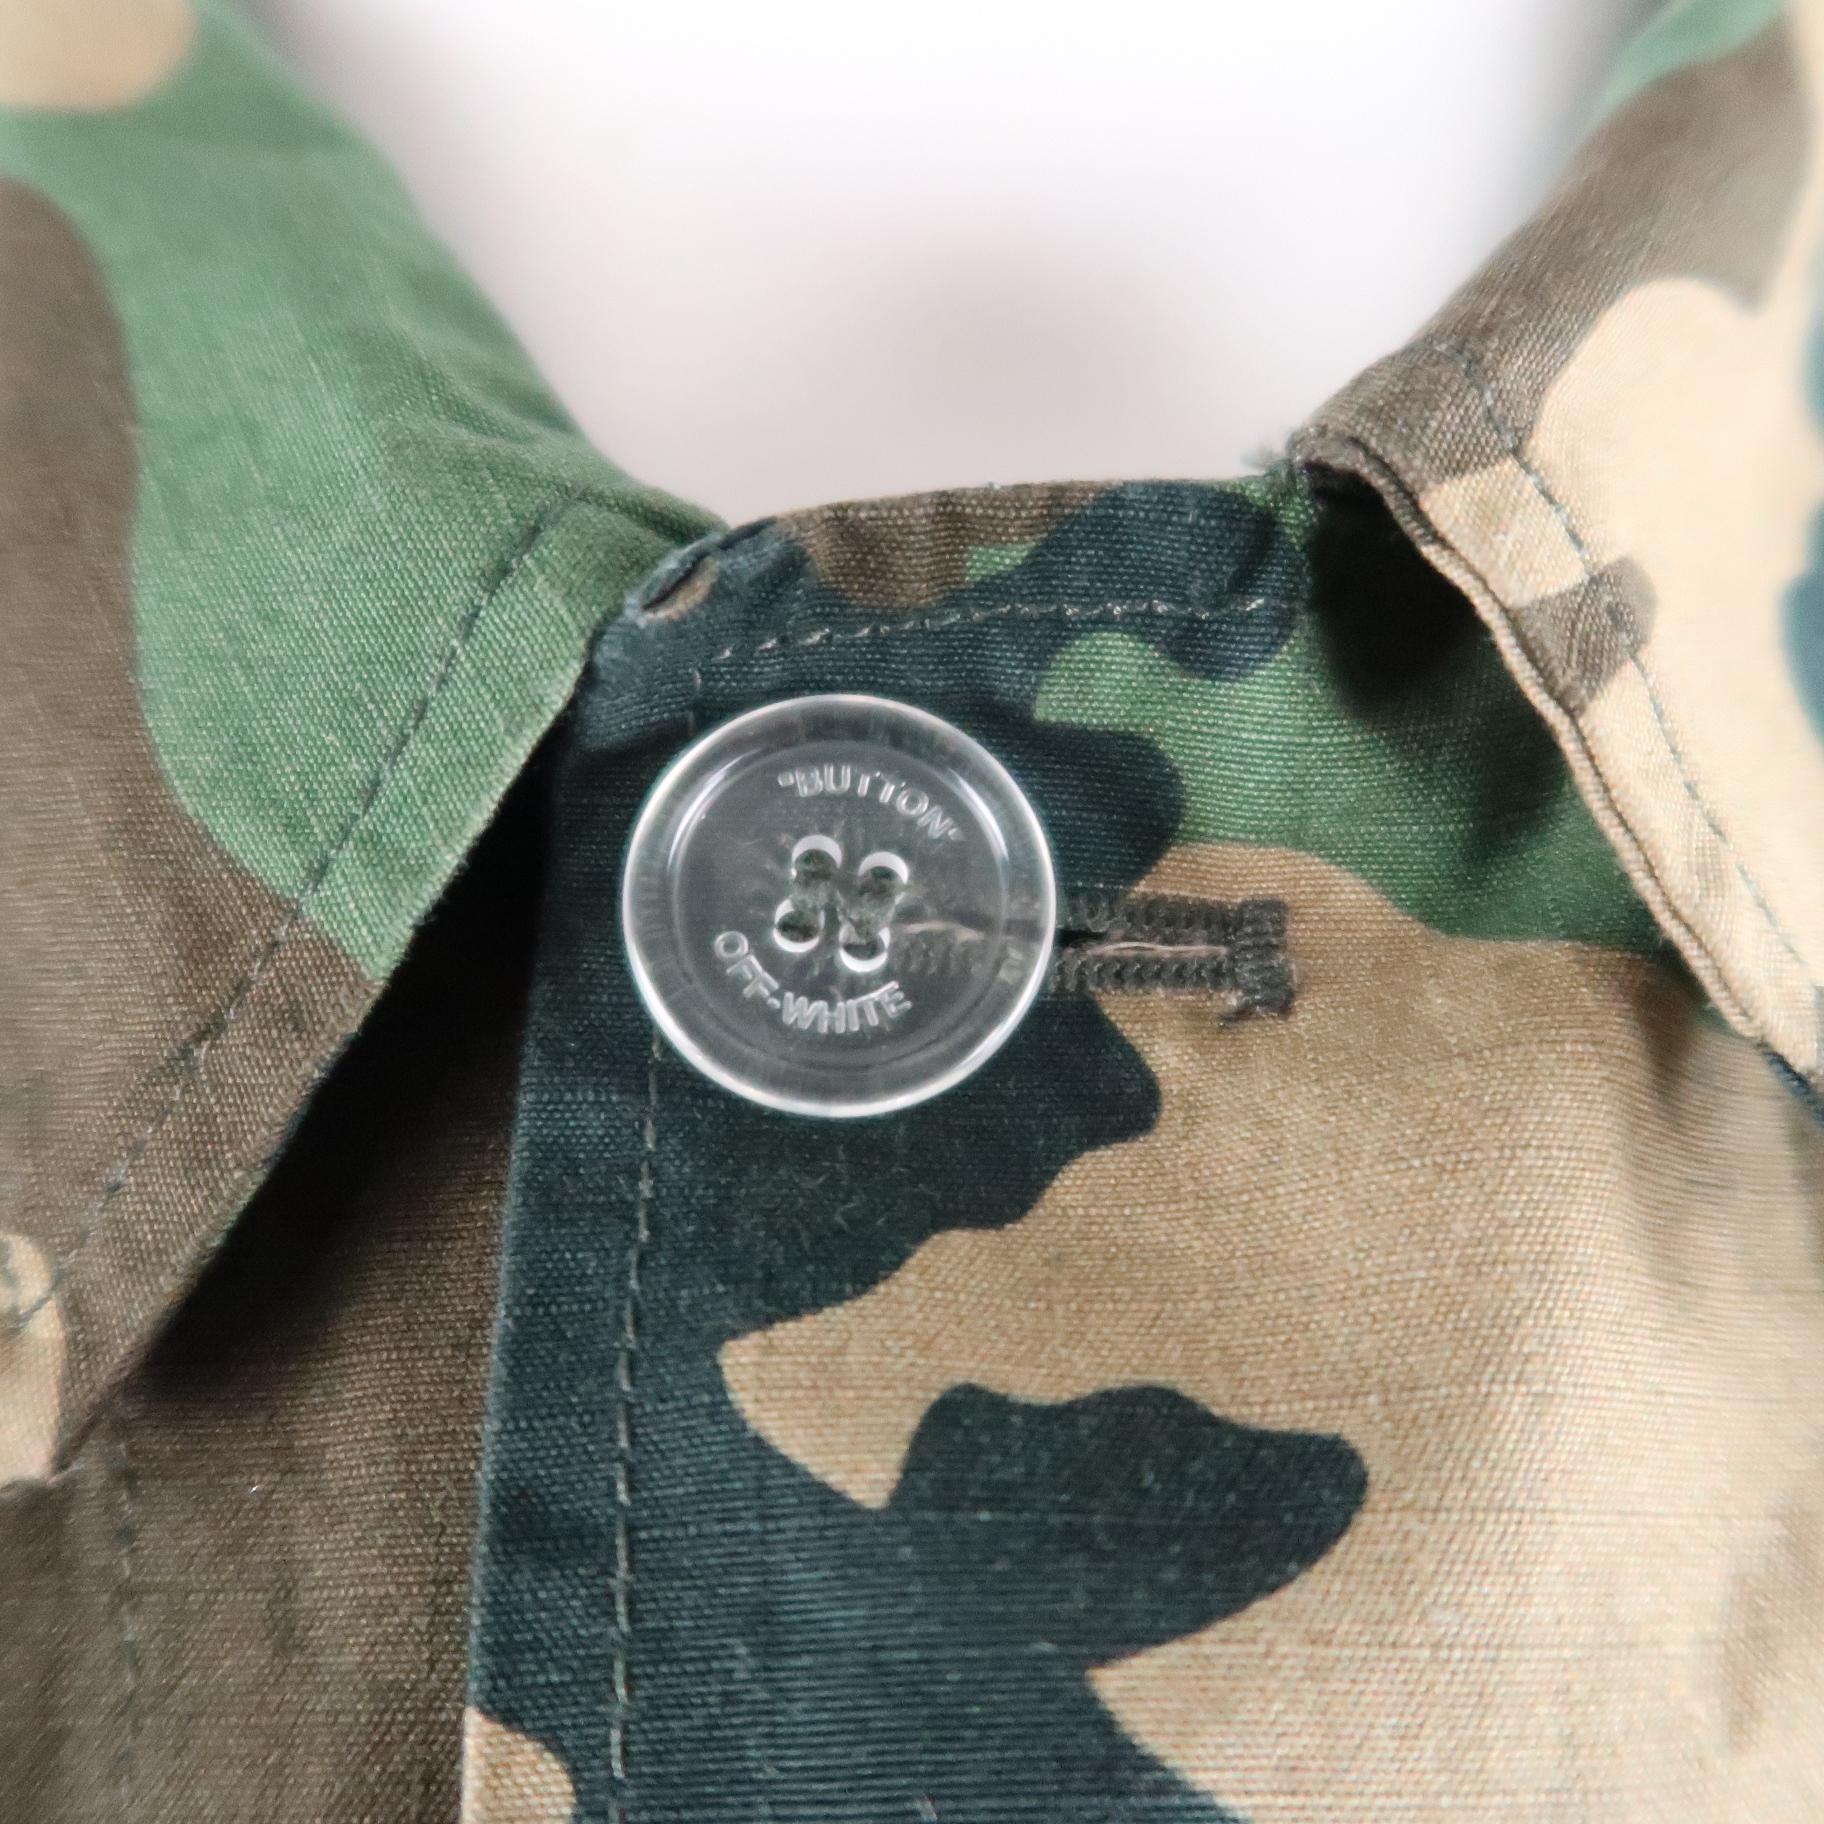 off white camo jacket with patches